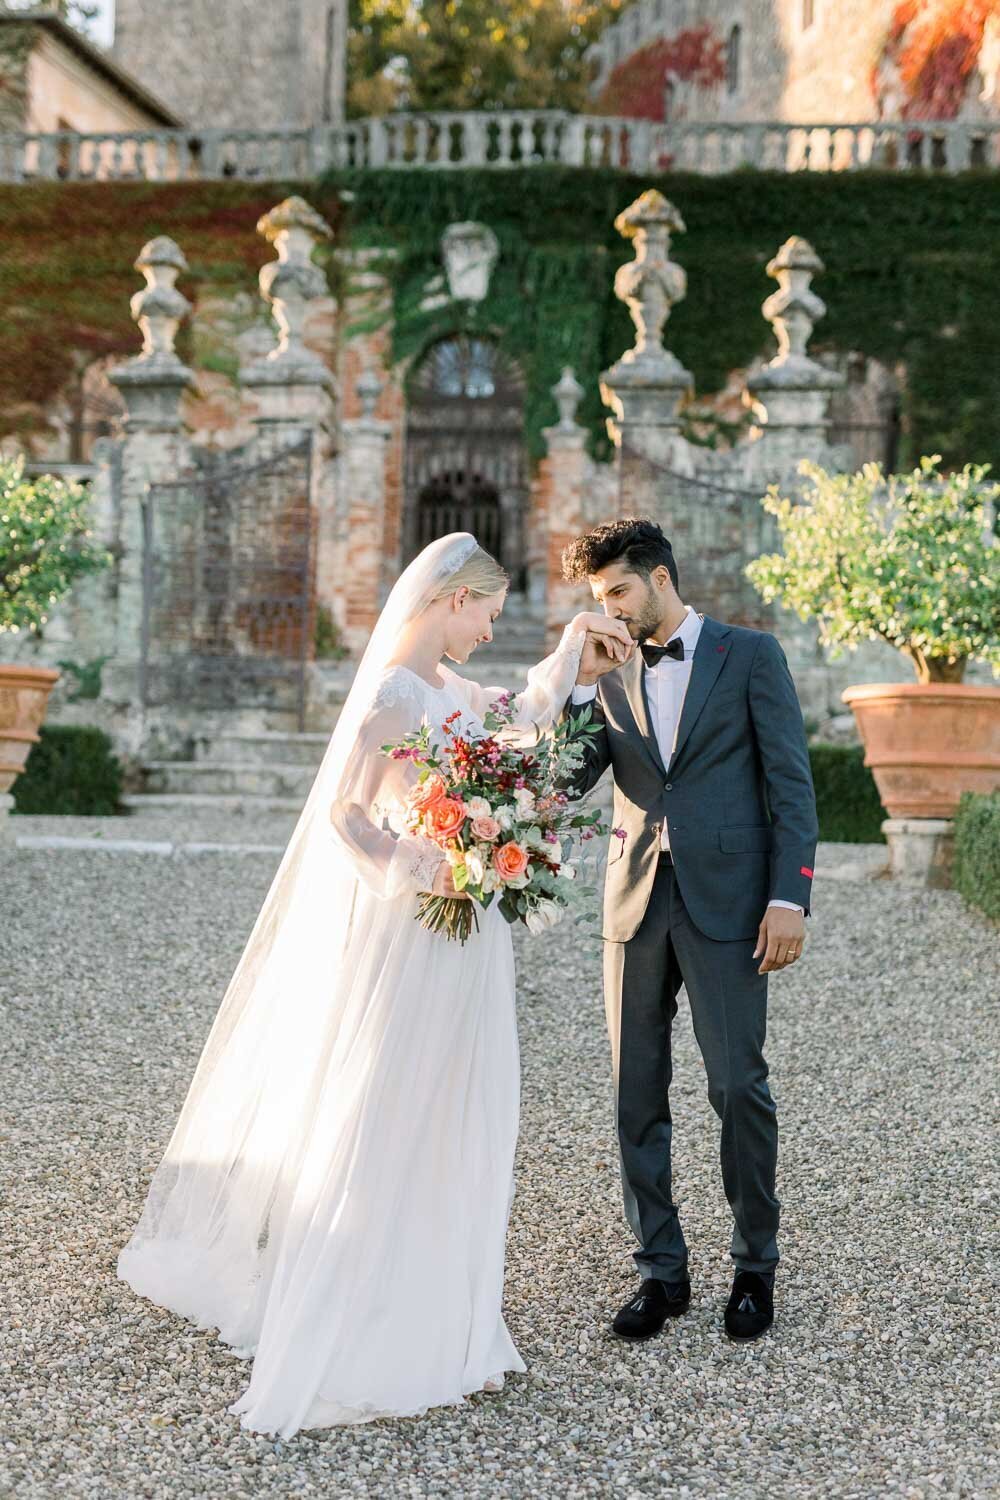 Groom kissing his bride in Tuscany